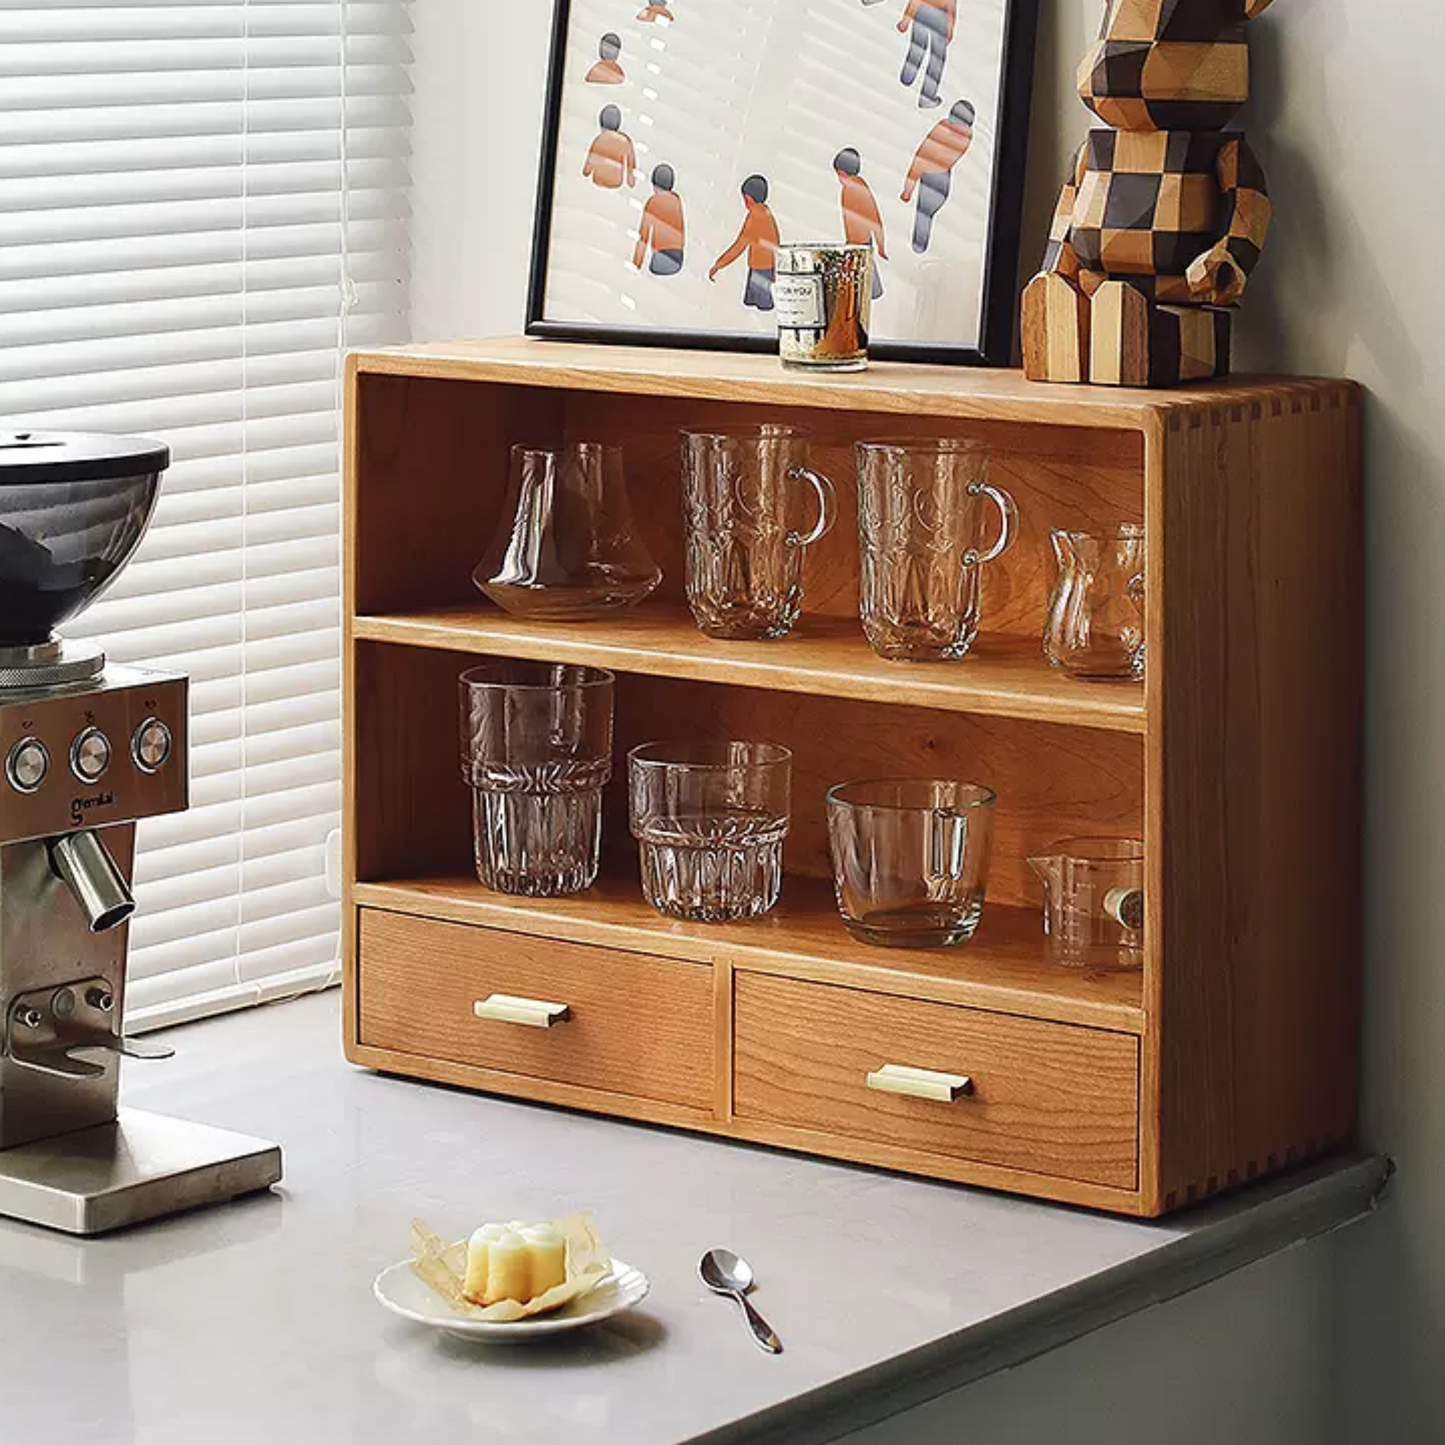 Wooden Double Shelf With Drawers